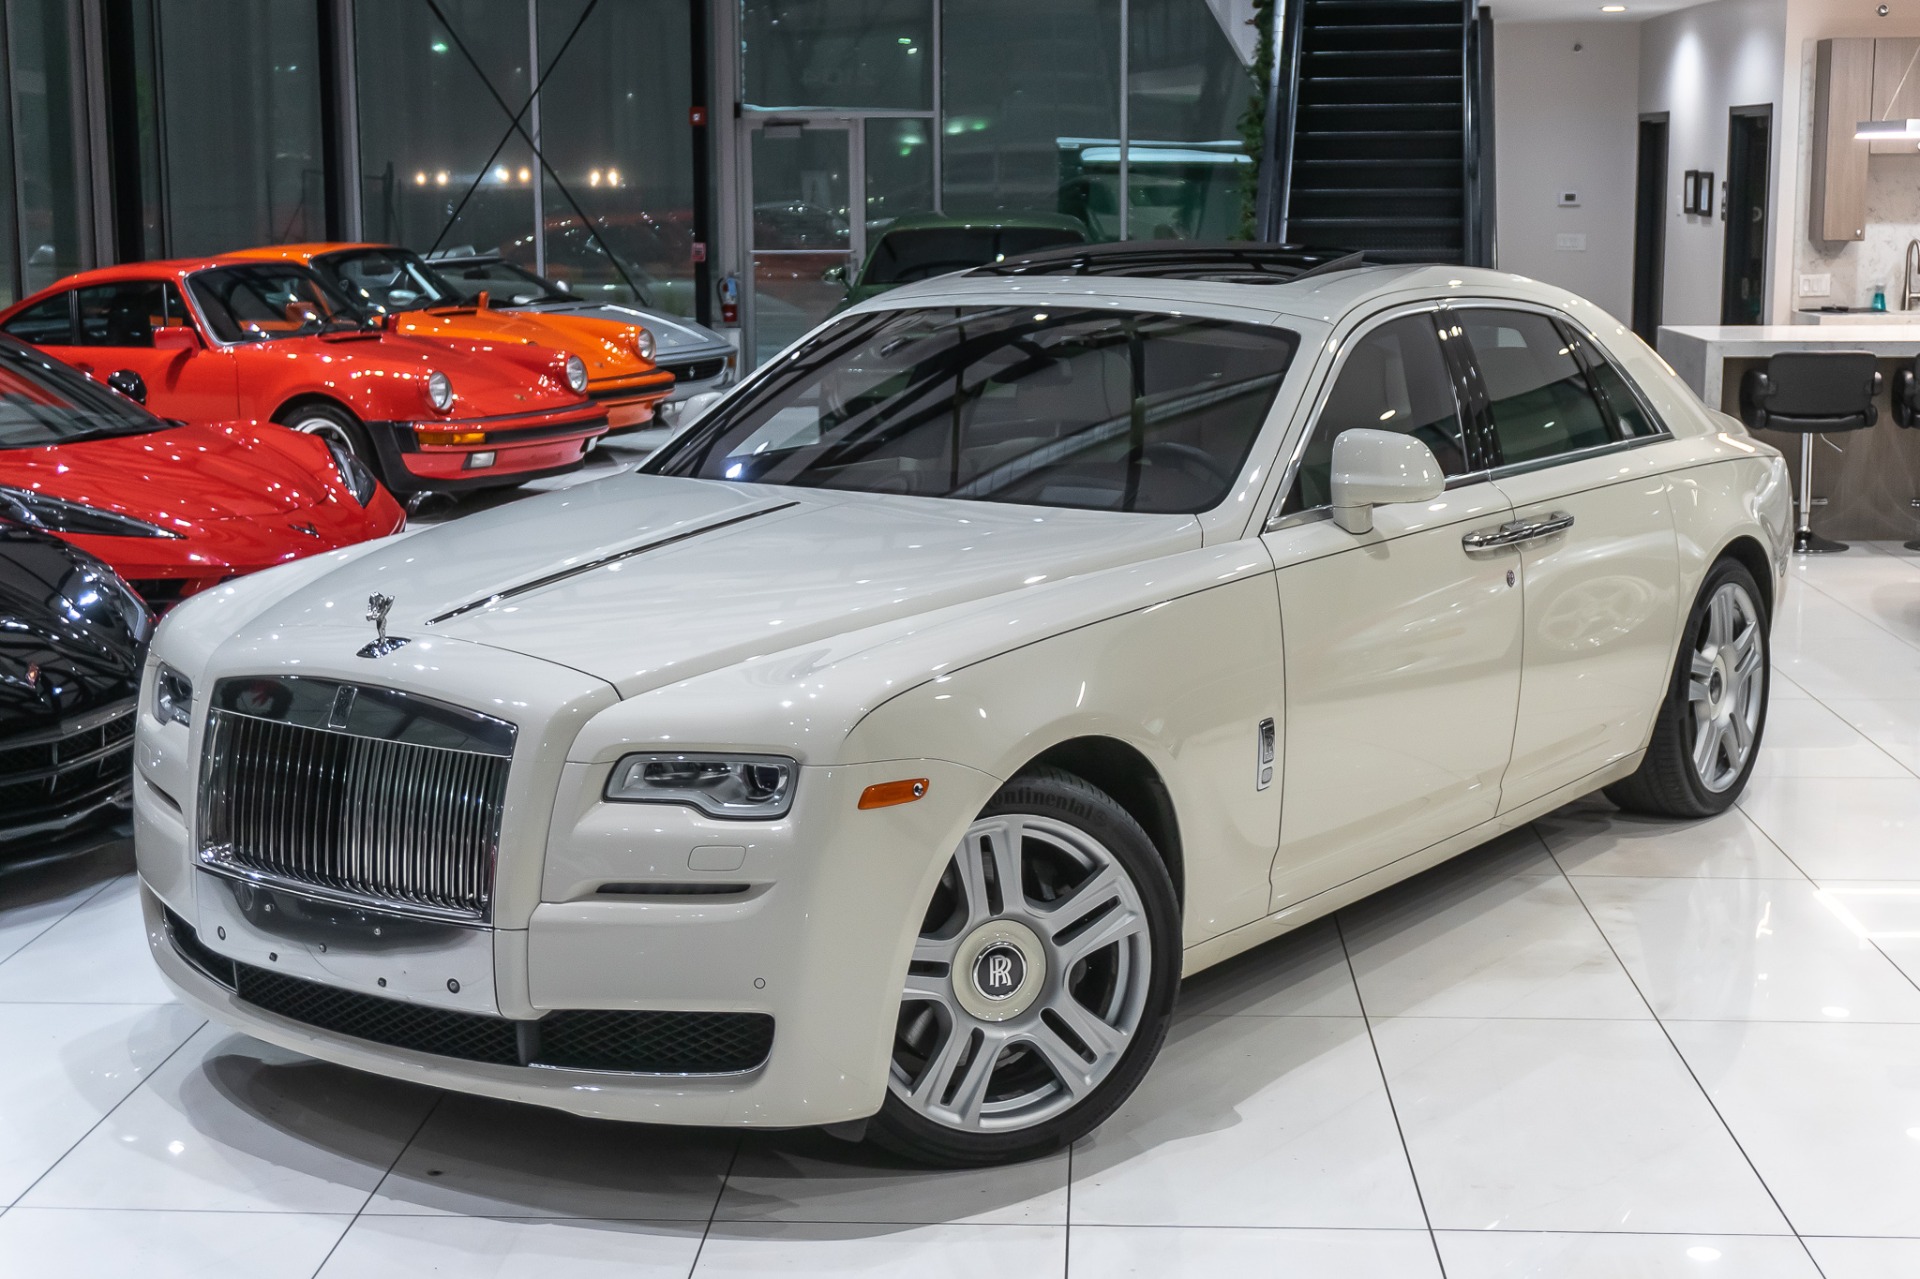 Used-2015-Rolls-Royce-Ghost-DRIVERS-ASST-PKG-PICNIC-TABLES-FULL-PAINT-PROTECTION-FILM-344k-MSRP